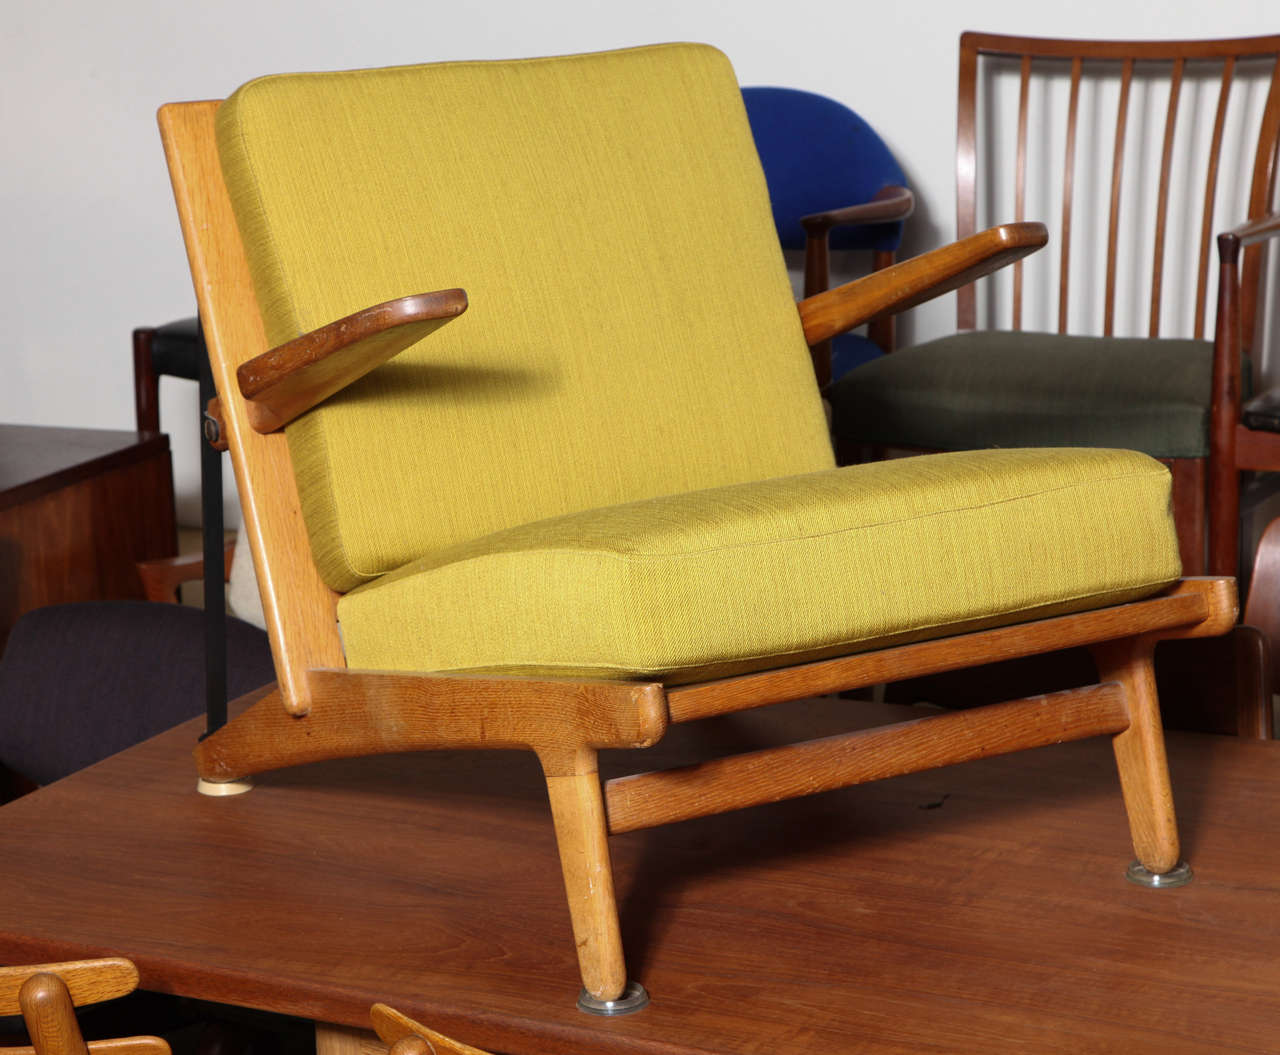 Vintage 1950s Danish Arm Chair by Borge Mogensen 

This rare Børge Mogensen easy chair is beautifully crafted in tiger oak with strong simple lines and amazing grain. The mix of metal, wood, and fabric lends a warm feel, functionality and comfort.